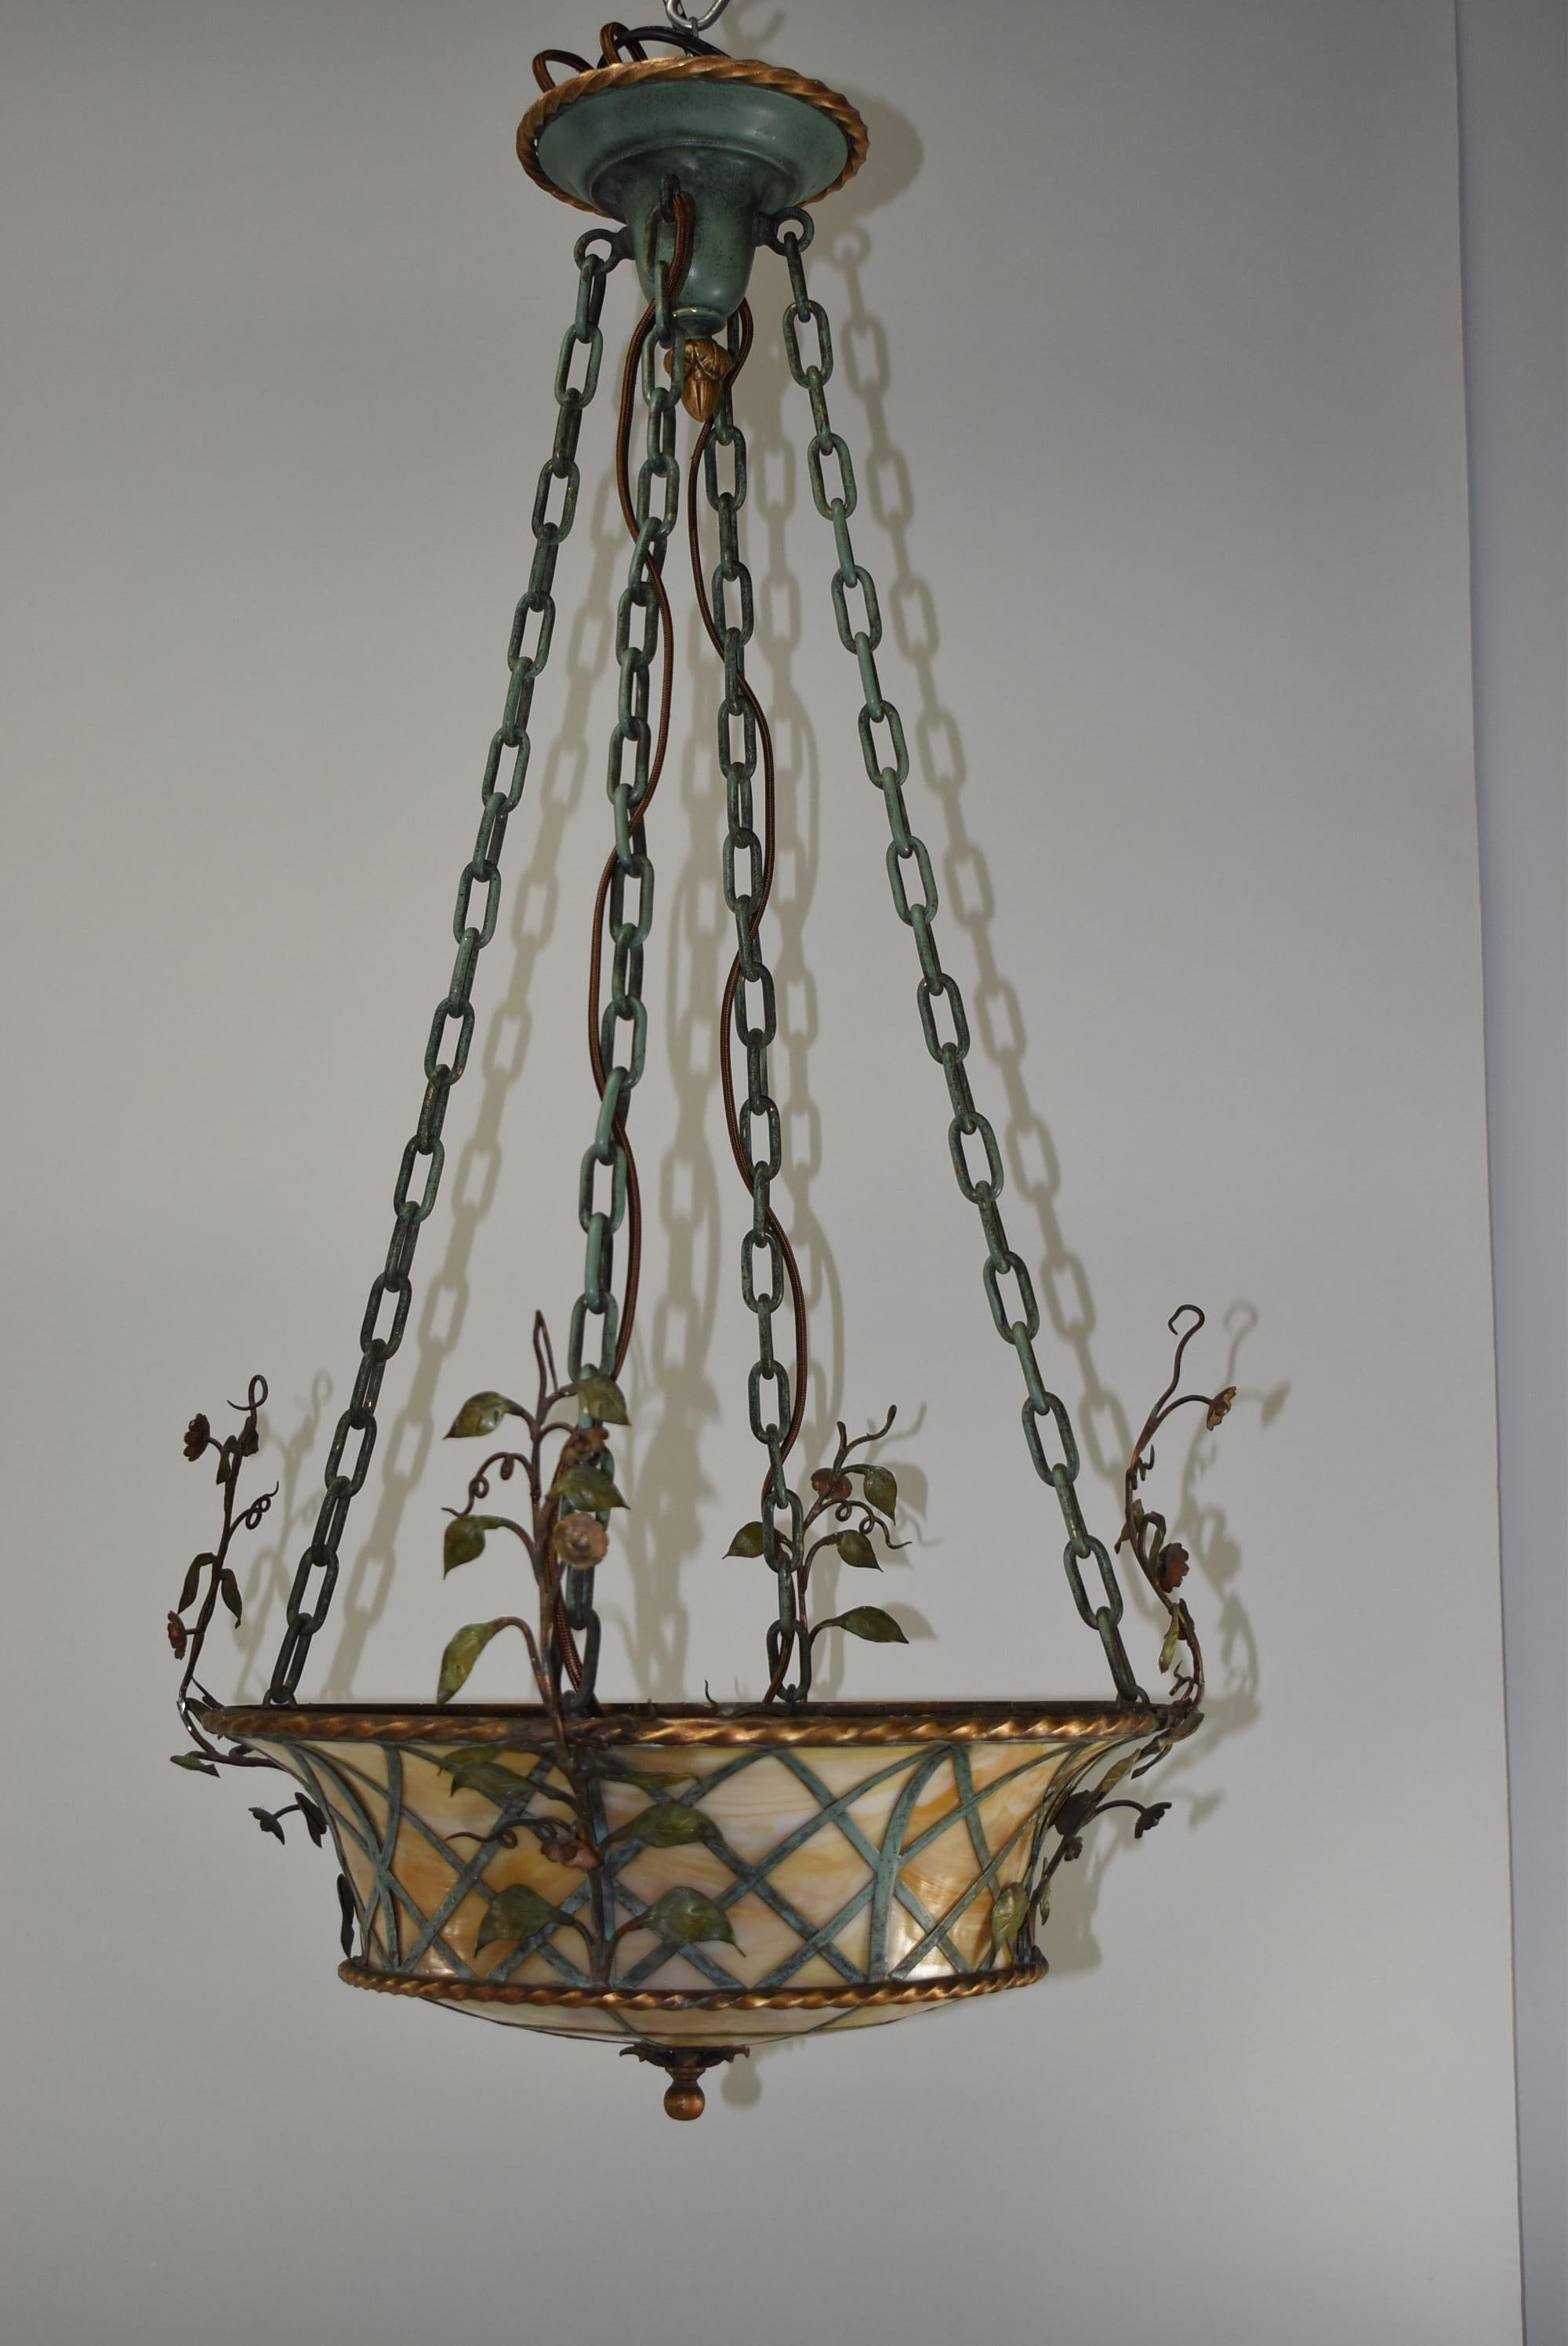 Pair of slag glass 1920s basket form brass and iron chandeliers with hand painted leaf and vine details. Amber bent glass panels. Spiral brass trim rings. Original ceiling caps.